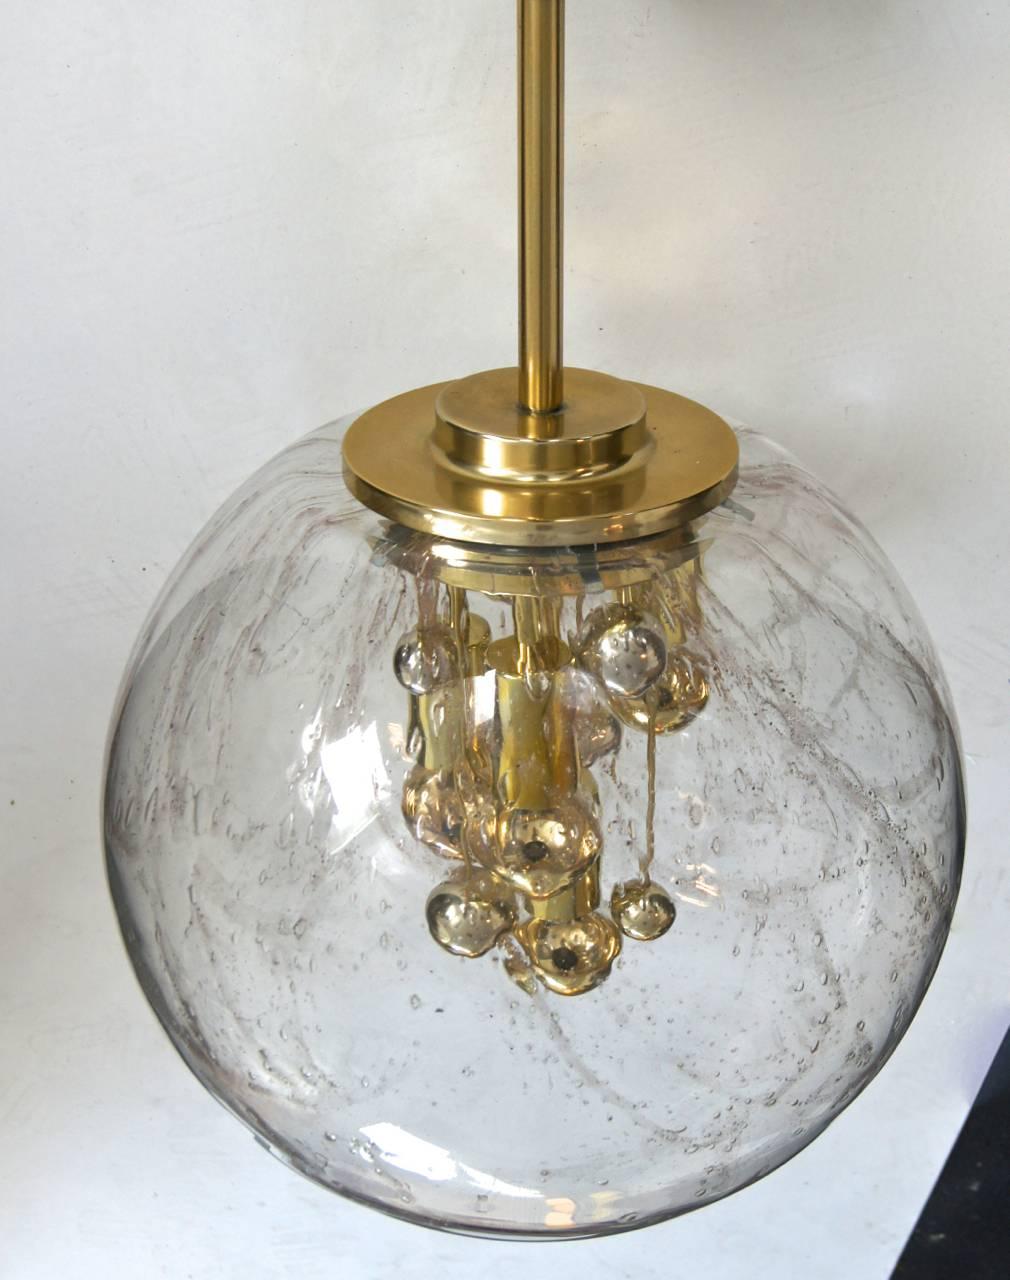 Large handblown textured globe with gold swirl. Manufactured by Doria in the 1970s. Brass interior fittings set in different lengths complimented with gold tipped bulbs.